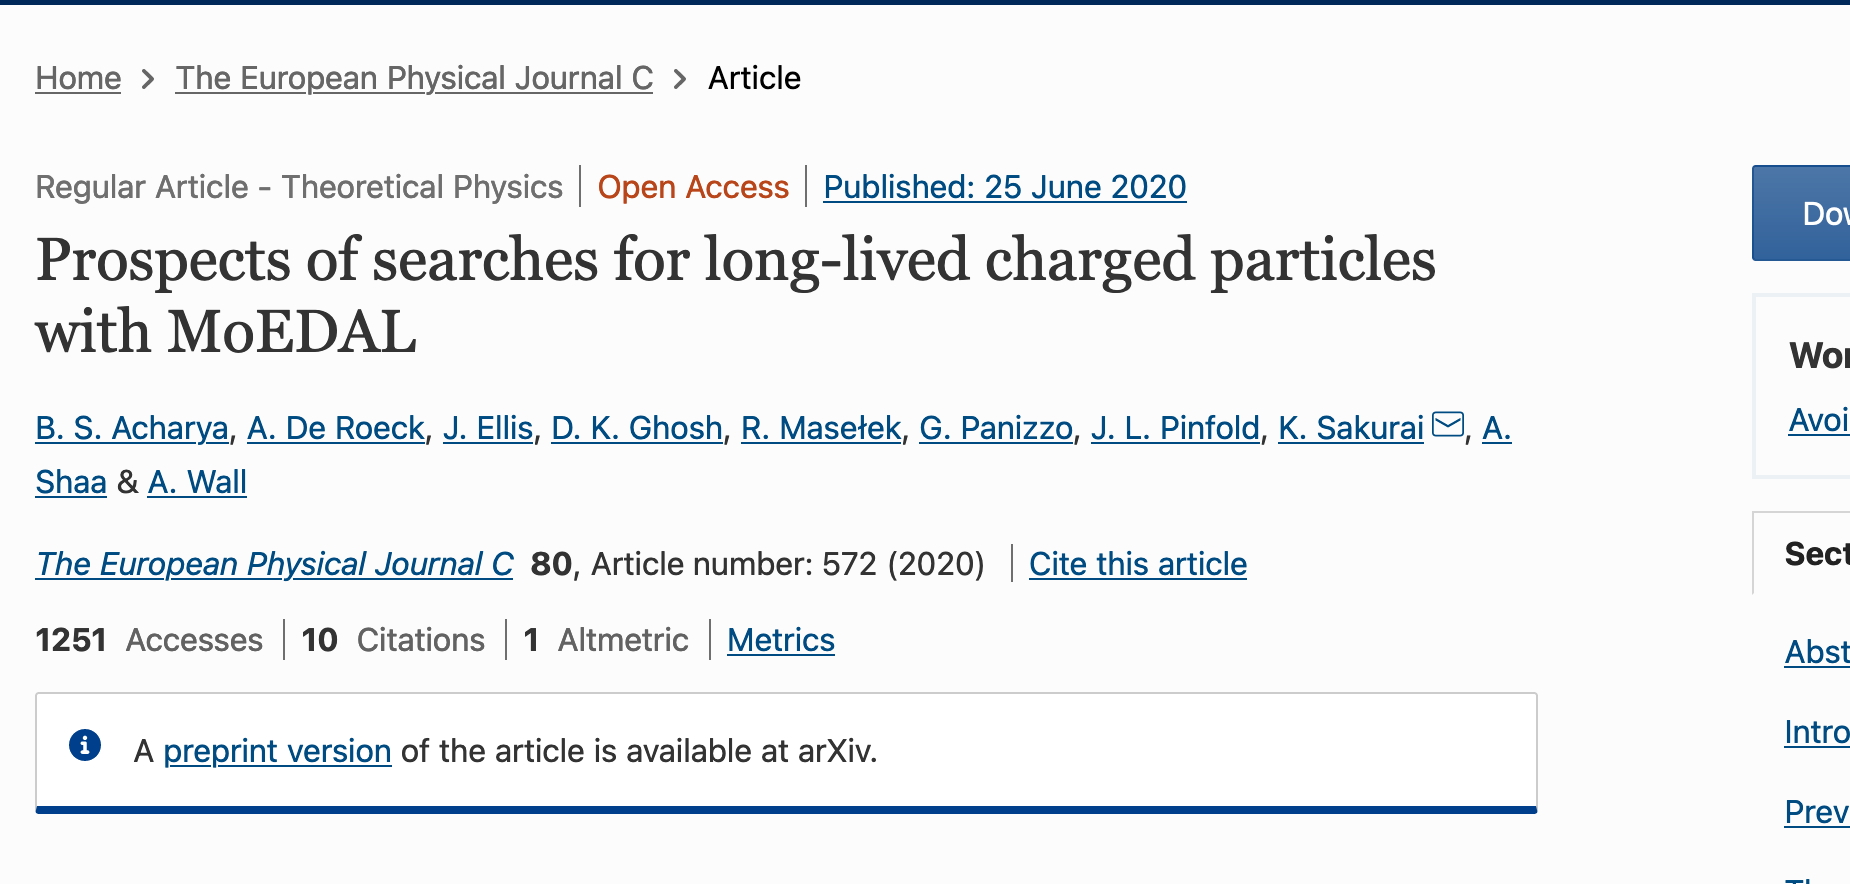 Prospects of searches for long-lived charged particles with MoEDAL